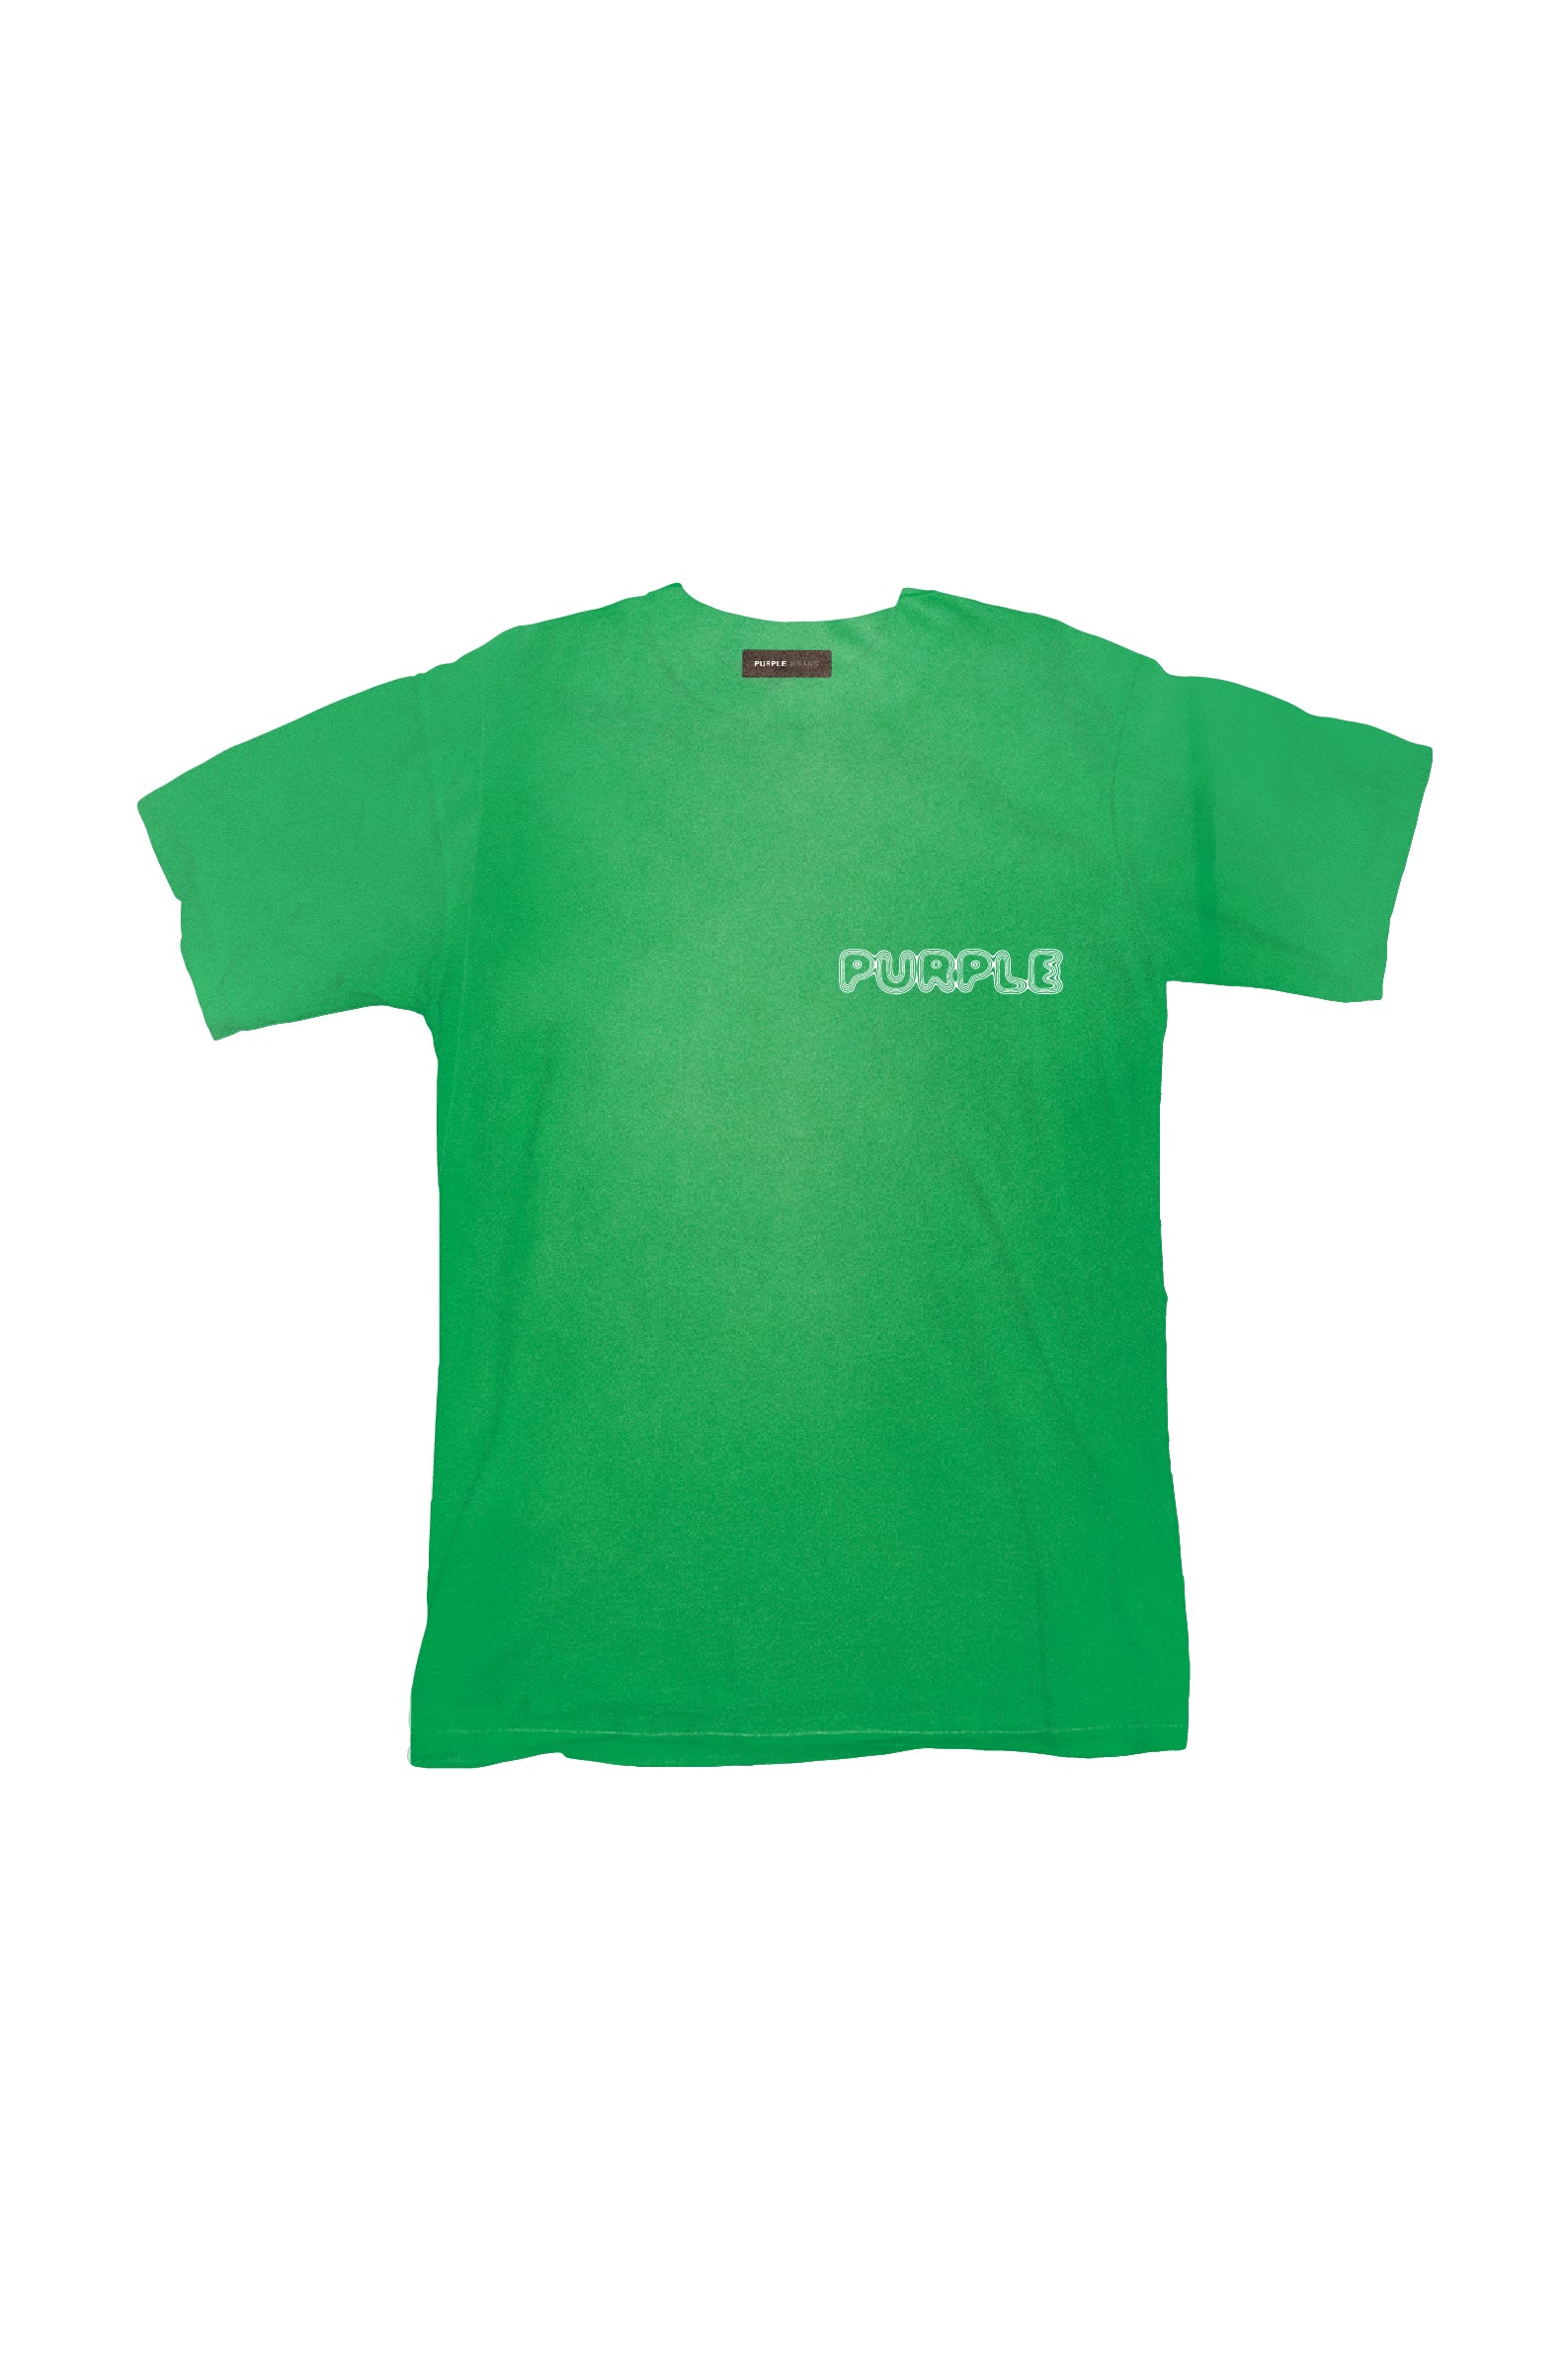 Purple Brand Textured Jersey Inside Out Tee- GREEN - Civilized